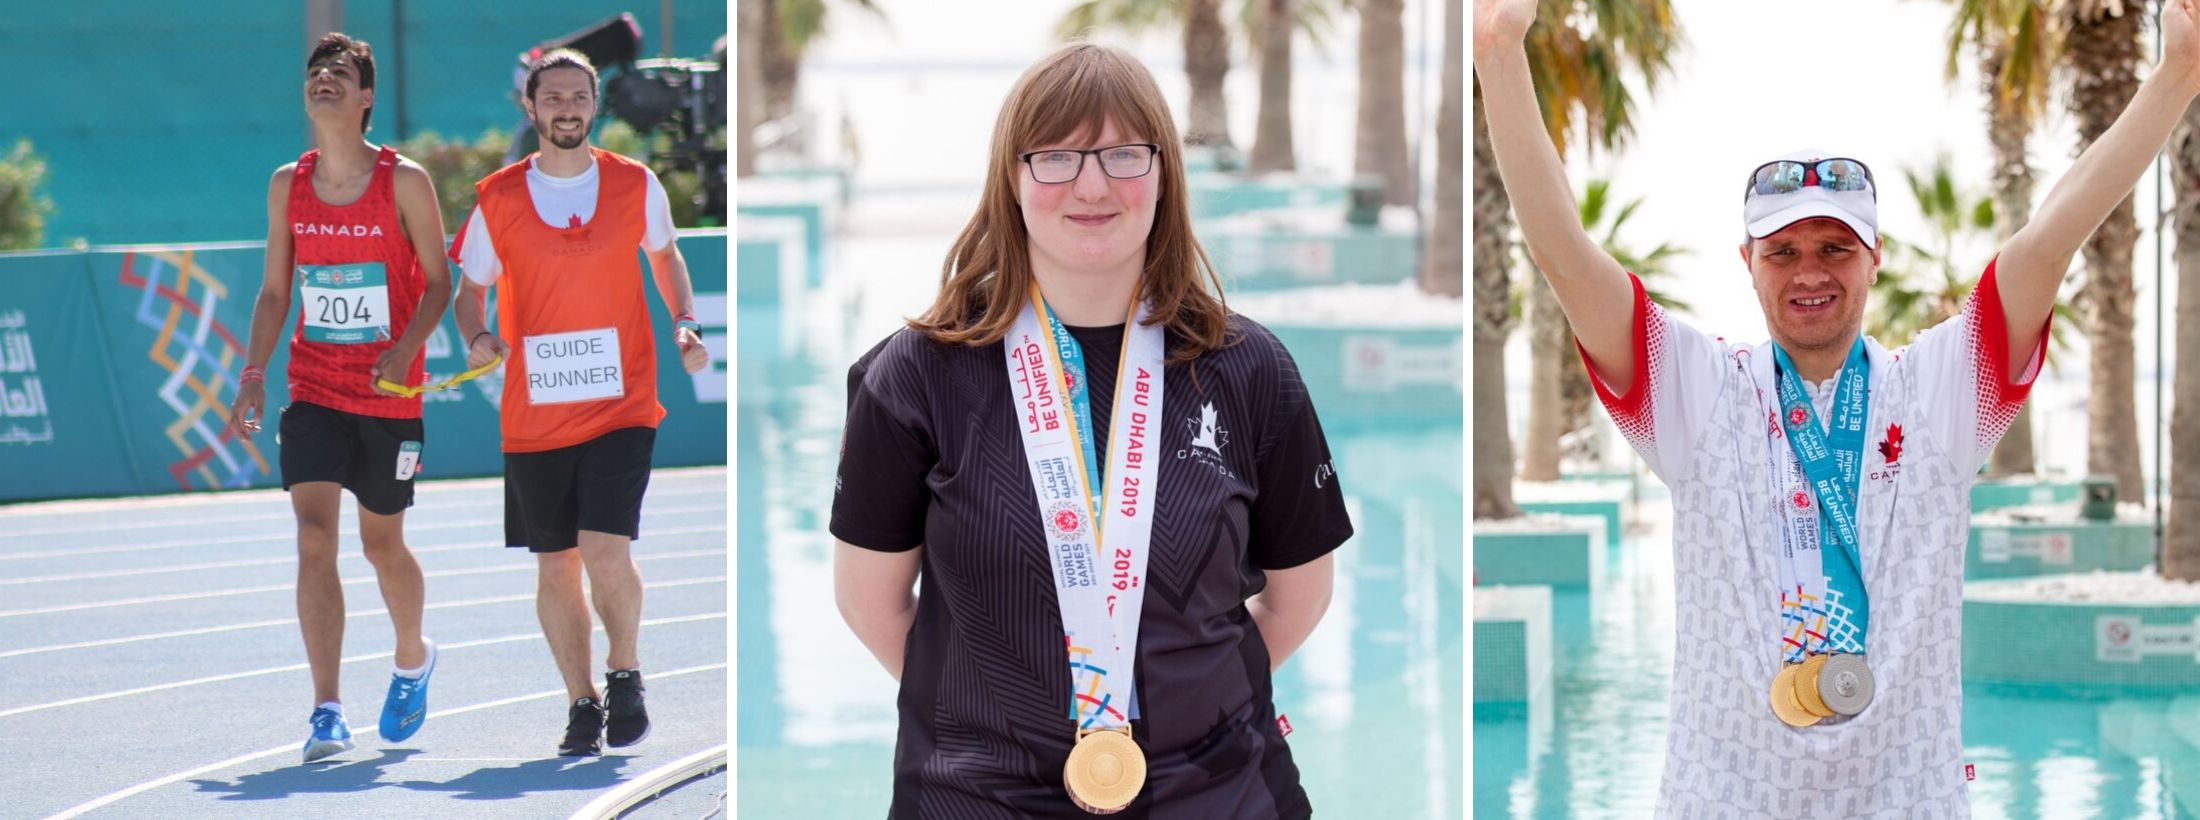 MEET SPECIAL OLYMPICS CANADA’S 2019 NATIONAL AWARD WINNERS Special